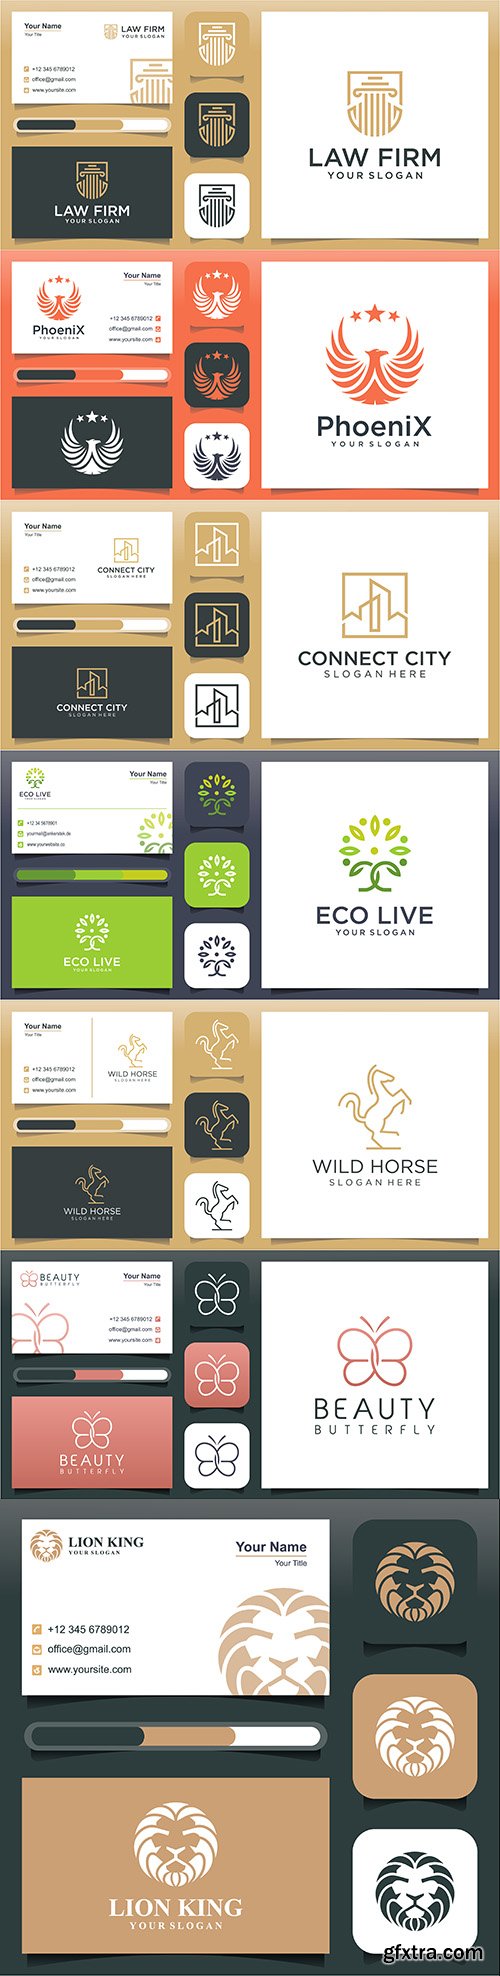 Business card and line logo design template
